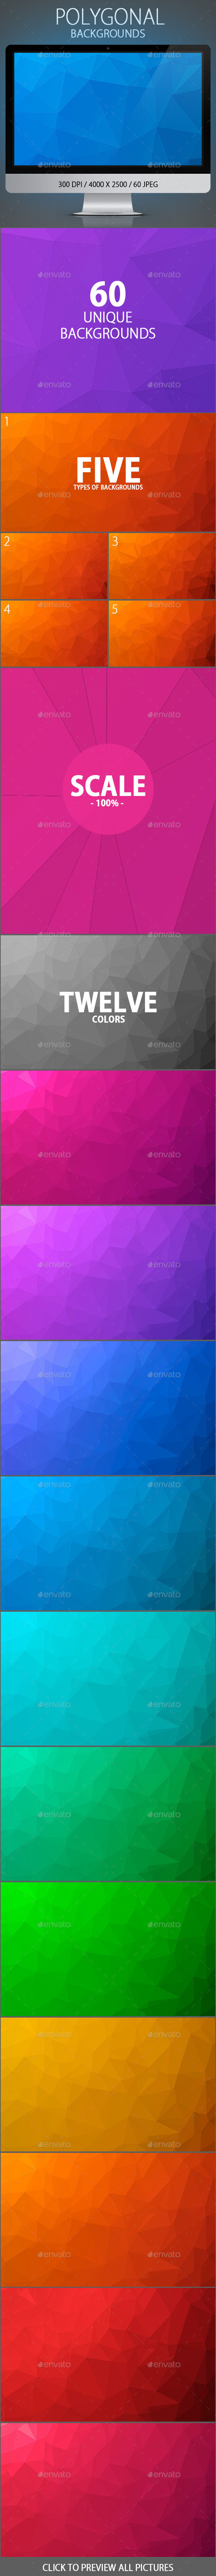 Title polygonal backgrounds